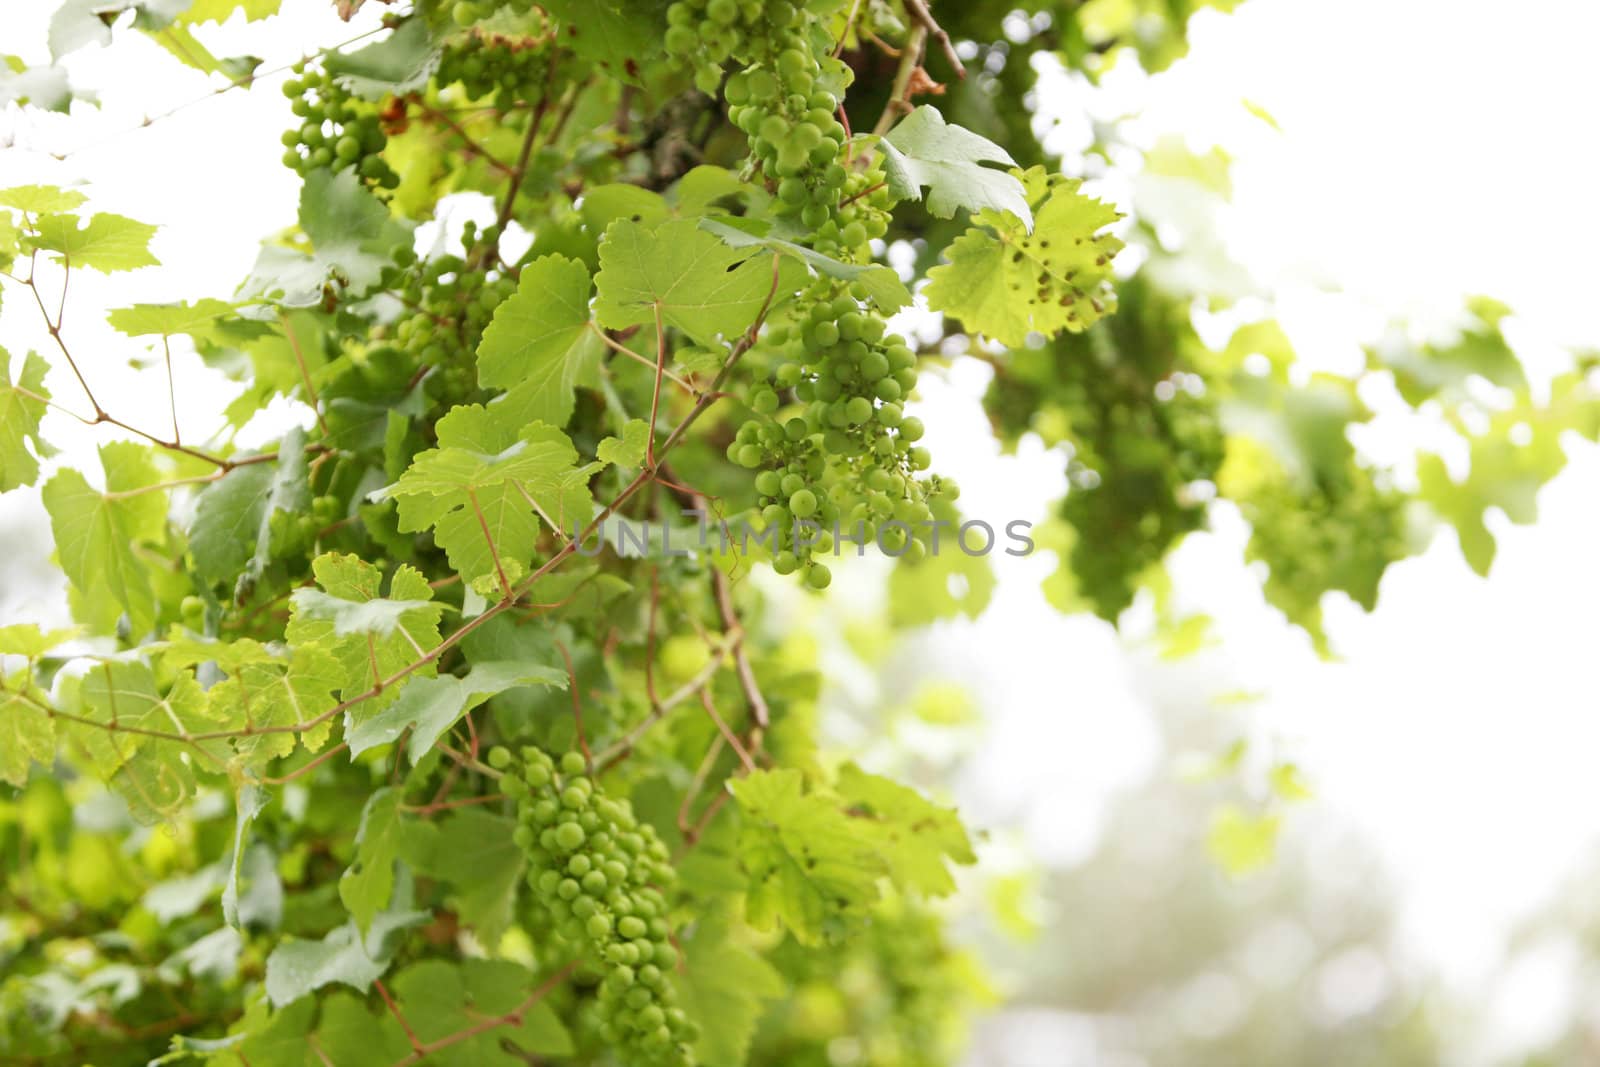 Lots of green grapes on a vine - landscape format with Copy Space